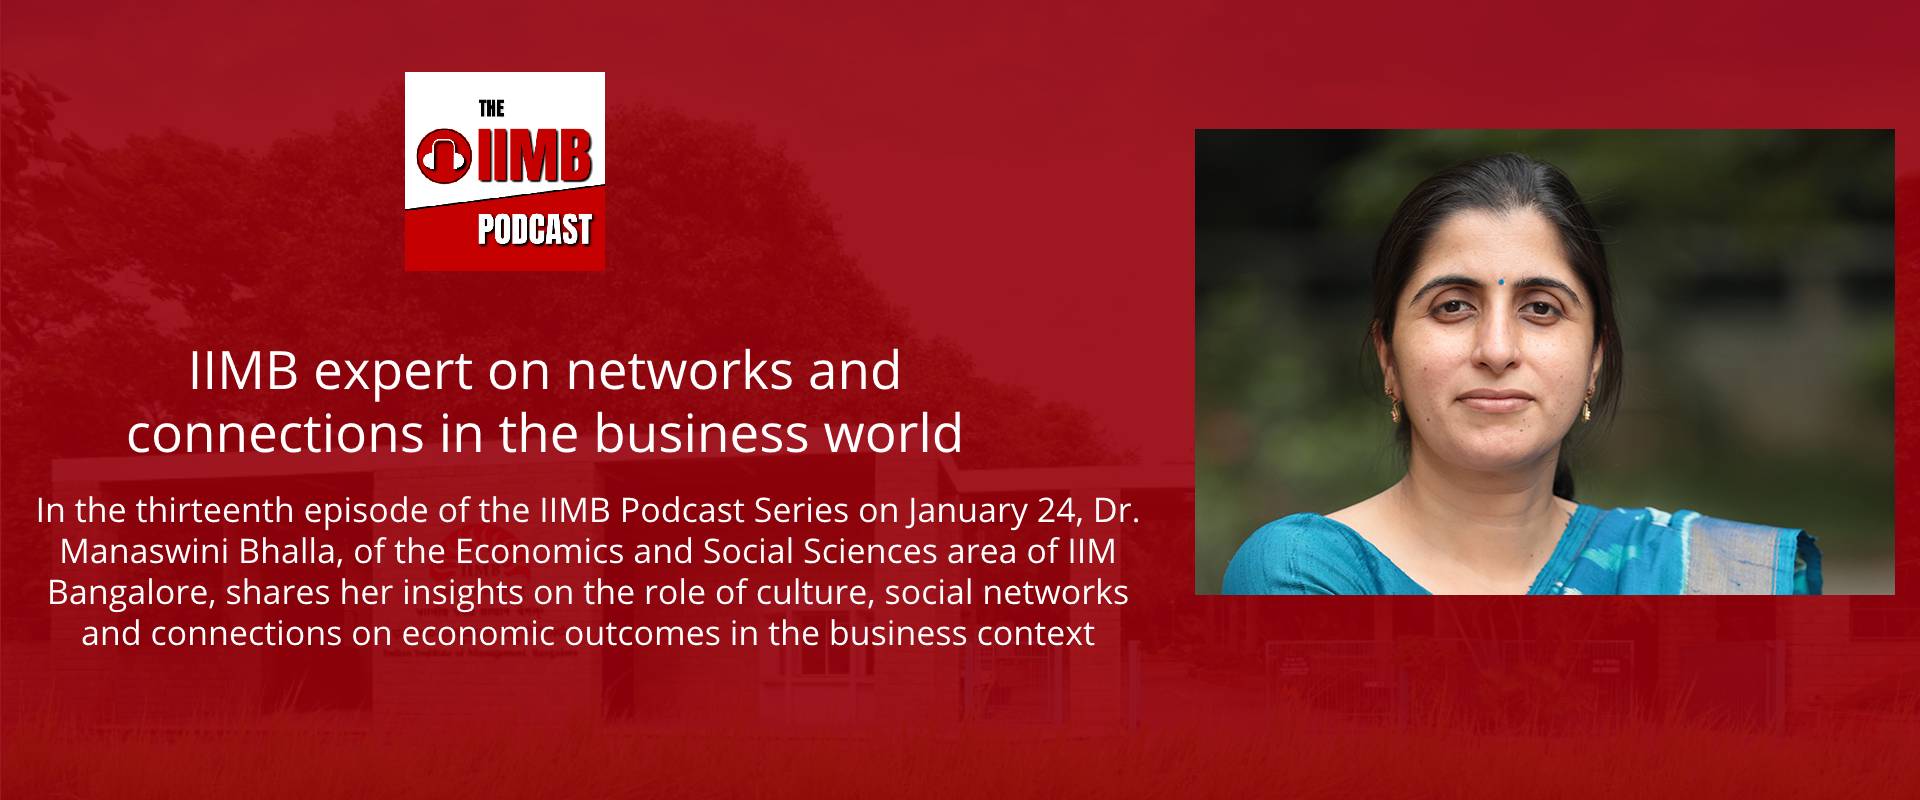 IIMB expert on networks and connections in the business world